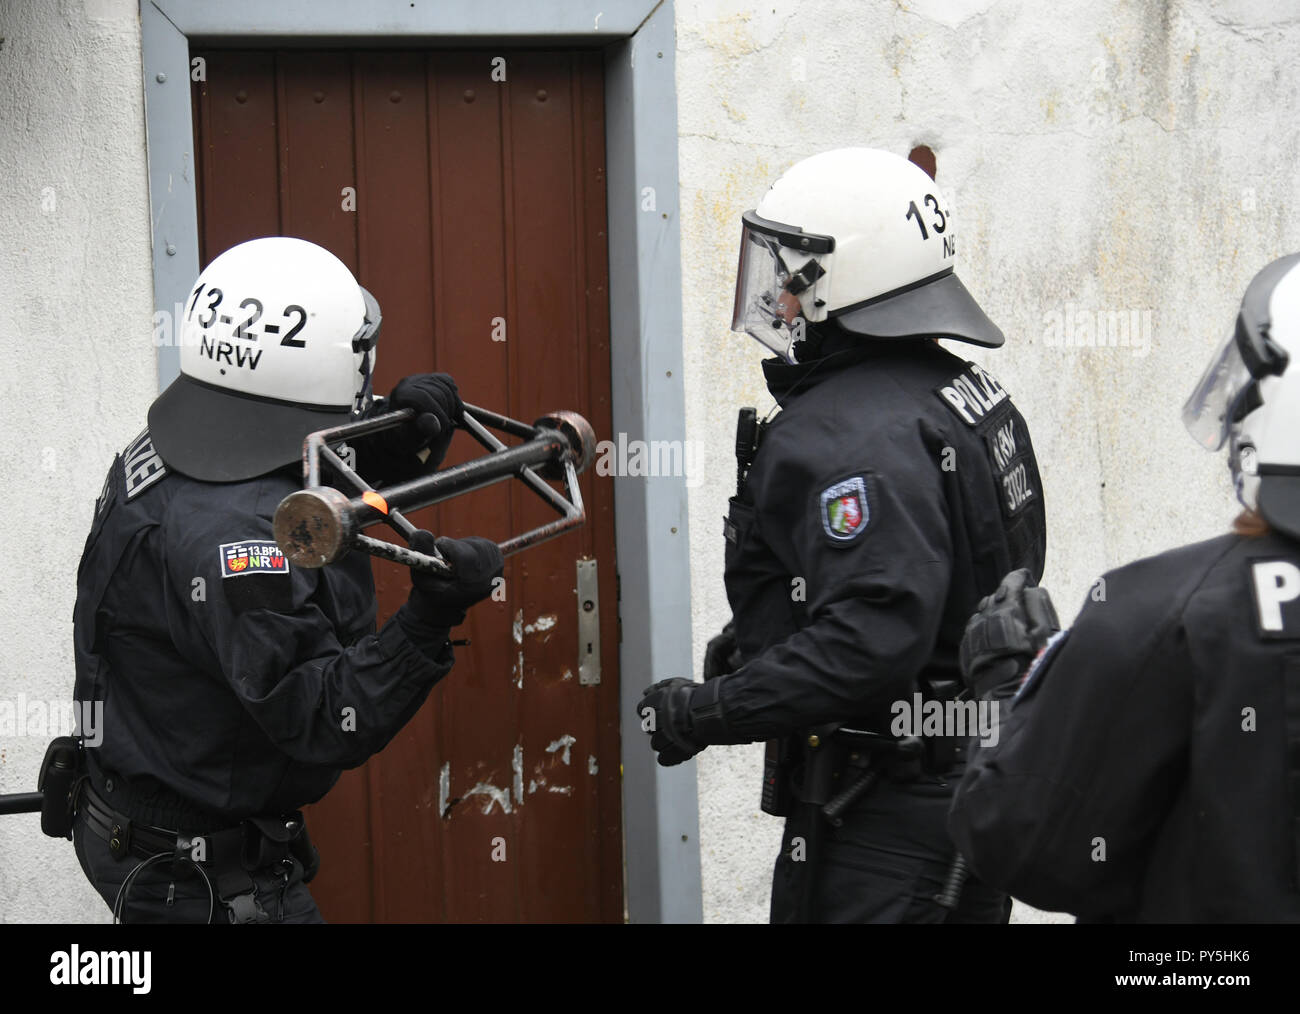 Manheim, Germany. 25th Oct, 2018. Policemen use a tower to open the door of a house that had been occupied by opponents of brown coal. After the evacuation of a protest camp during the night, on Thursday morning the task forces began to bring activists from squatted houses in the Kerpen district. The protest group, which had occupied the empty buildings on the edge of the opencast mine since last week, did not want to leave the houses voluntarily, the police said. The village of Manheim is to give way to open-cast mining. (Repetition with modified section) Credit: Henni/dpa/Alamy Live News Stock Photo